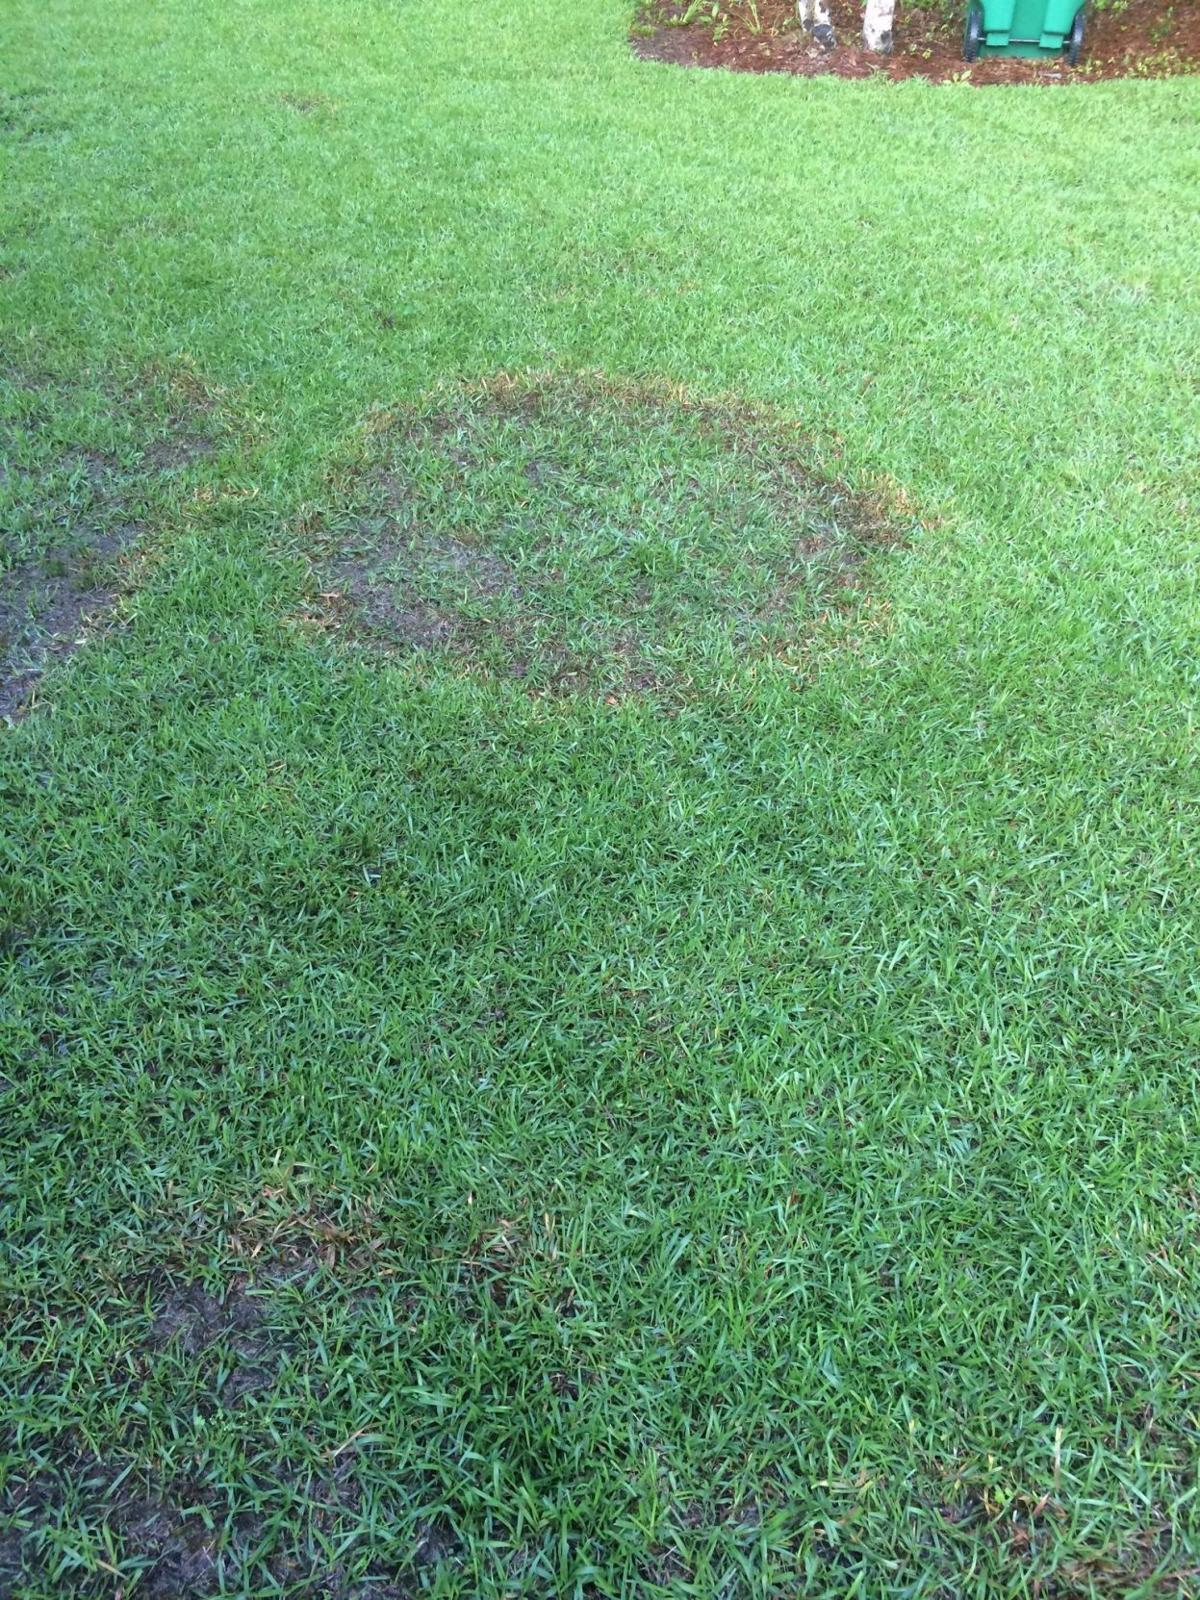 How To Treat Fungus Causing Brown Patches In Lawns Dan Gills Mailbag